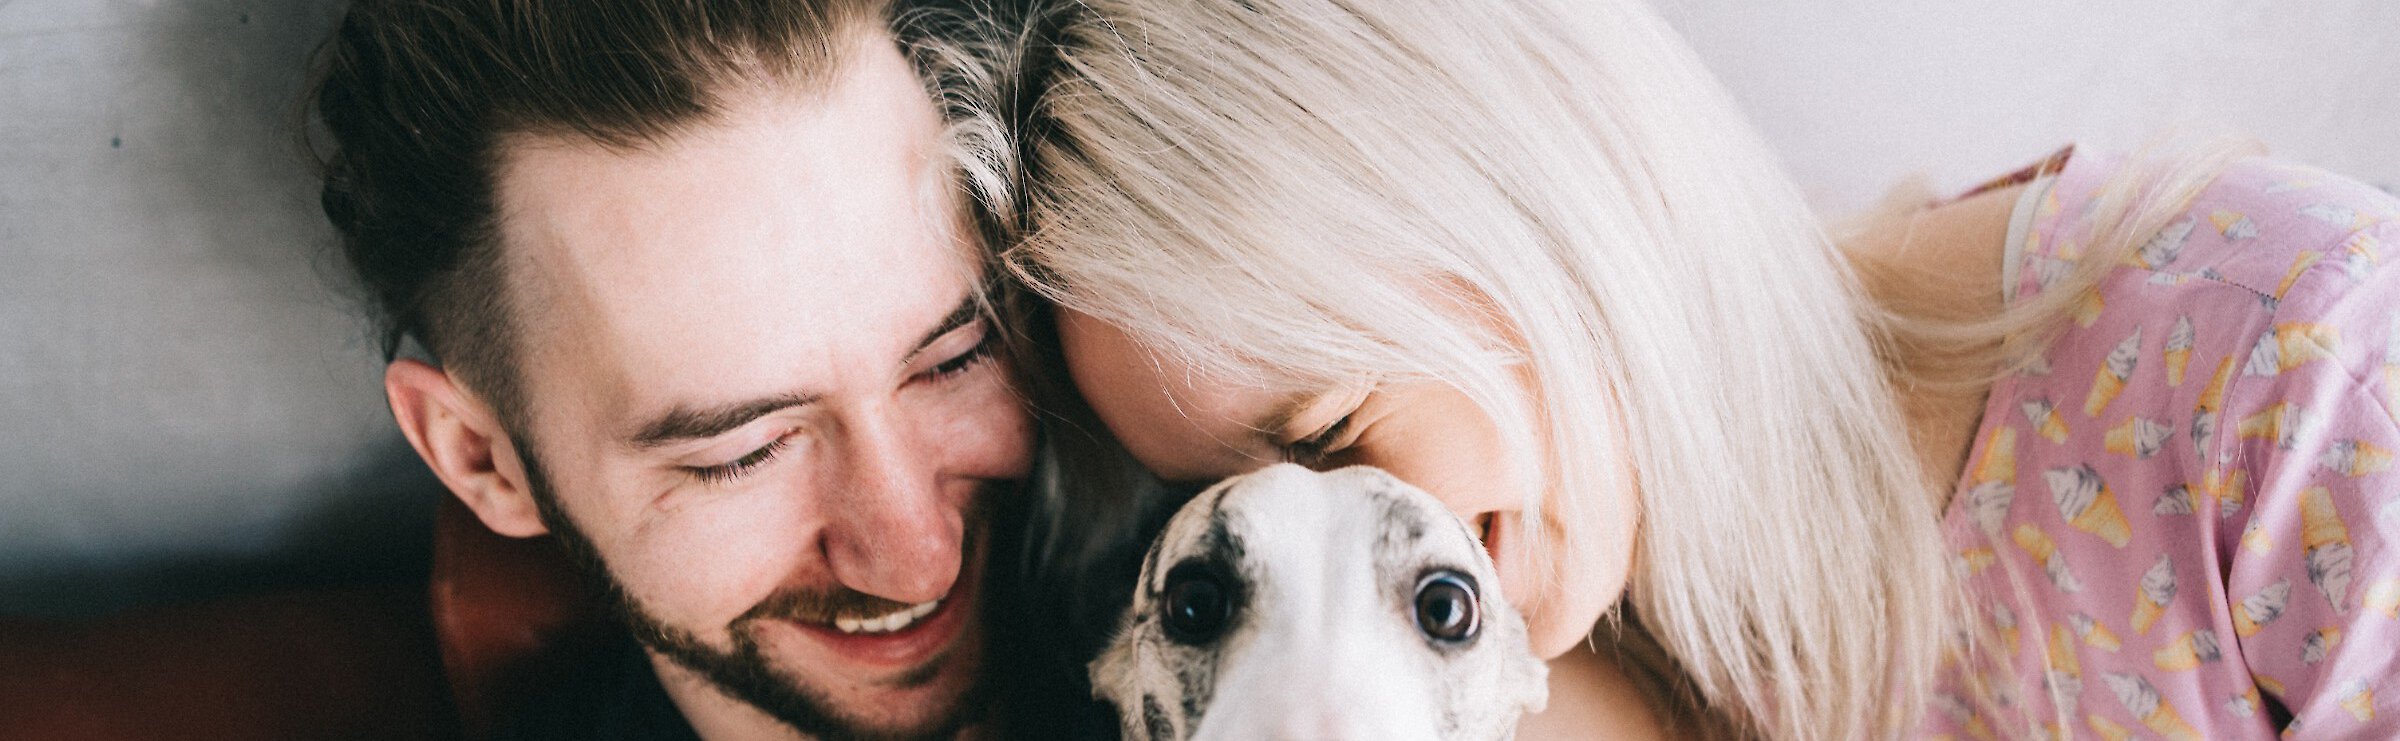 Couple smiling while holding a dog